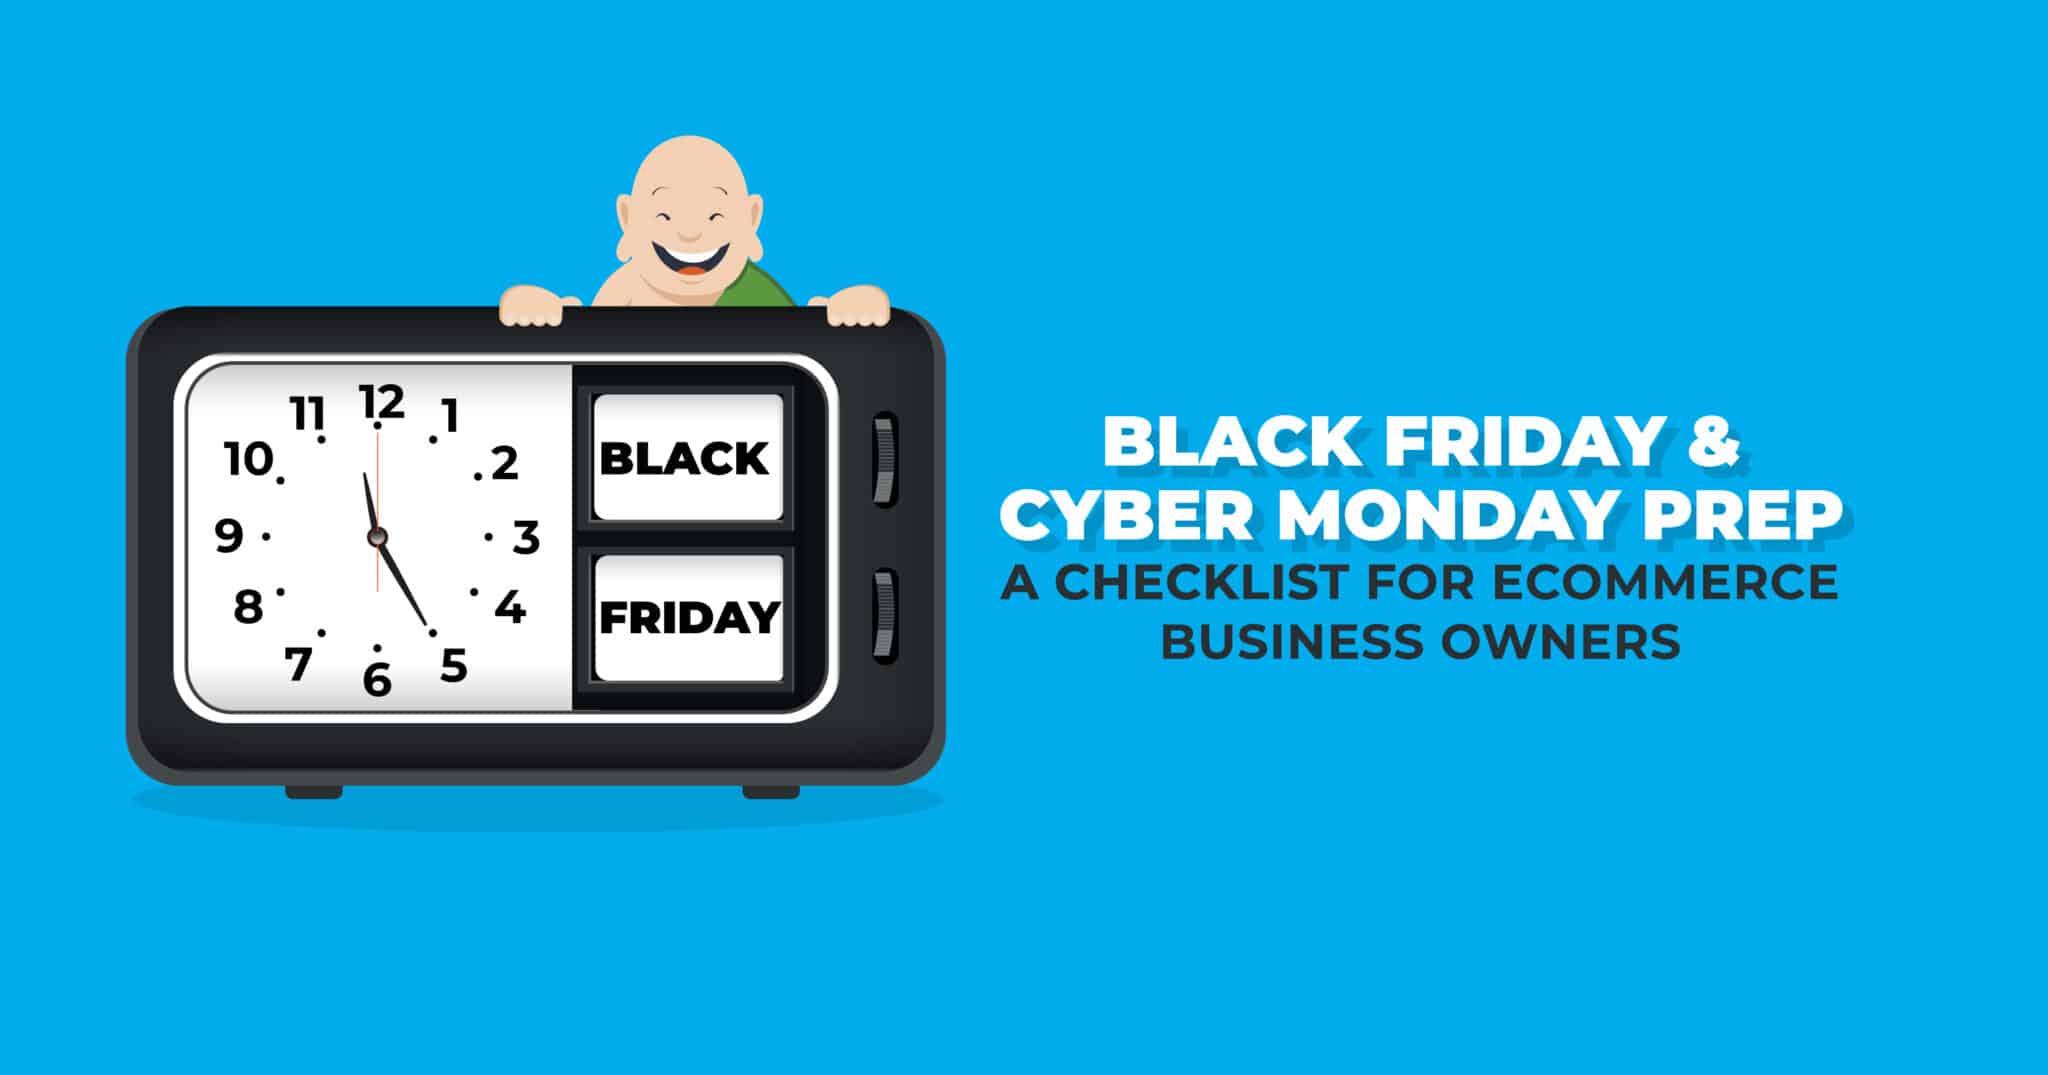 Black Friday Cyber Monday Preparation for Ecommerce Brands